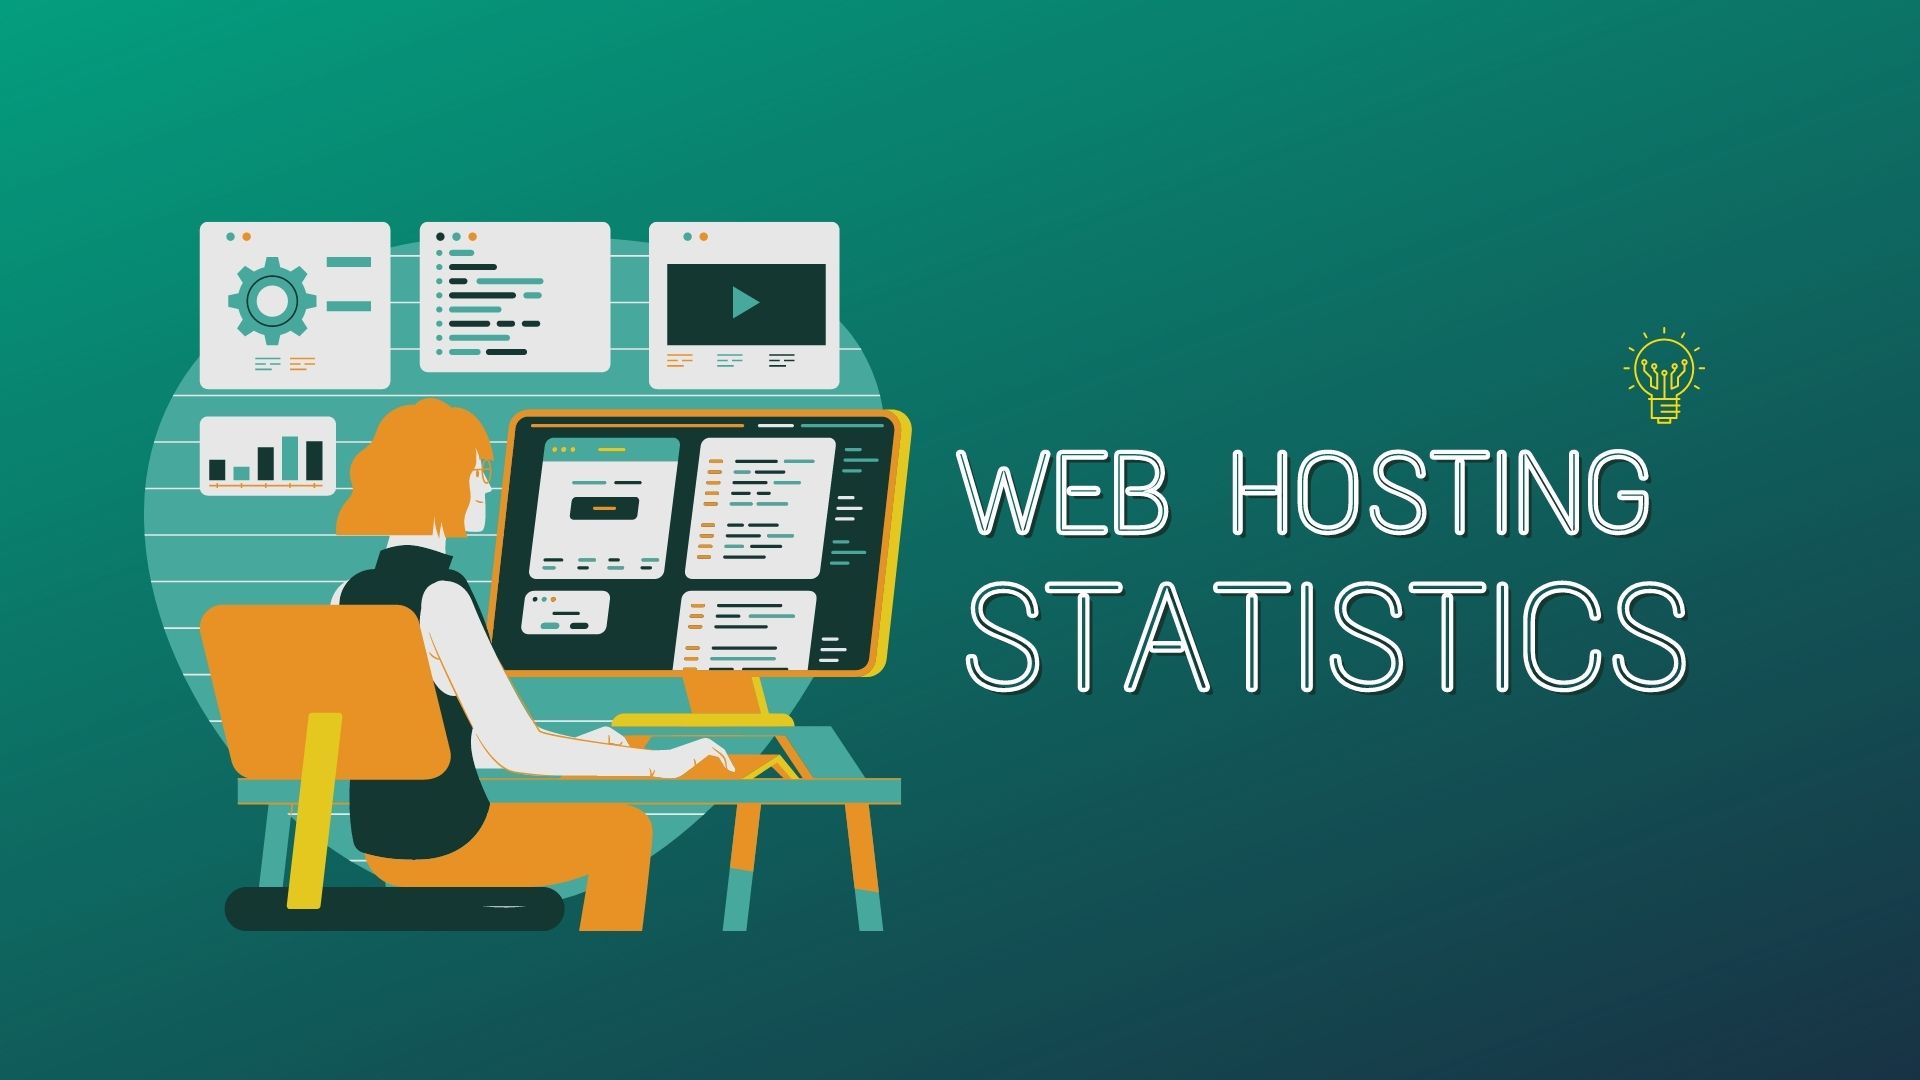 Web Hosting Statistics 2022 To Understand Trends, State Of Hosting Industry